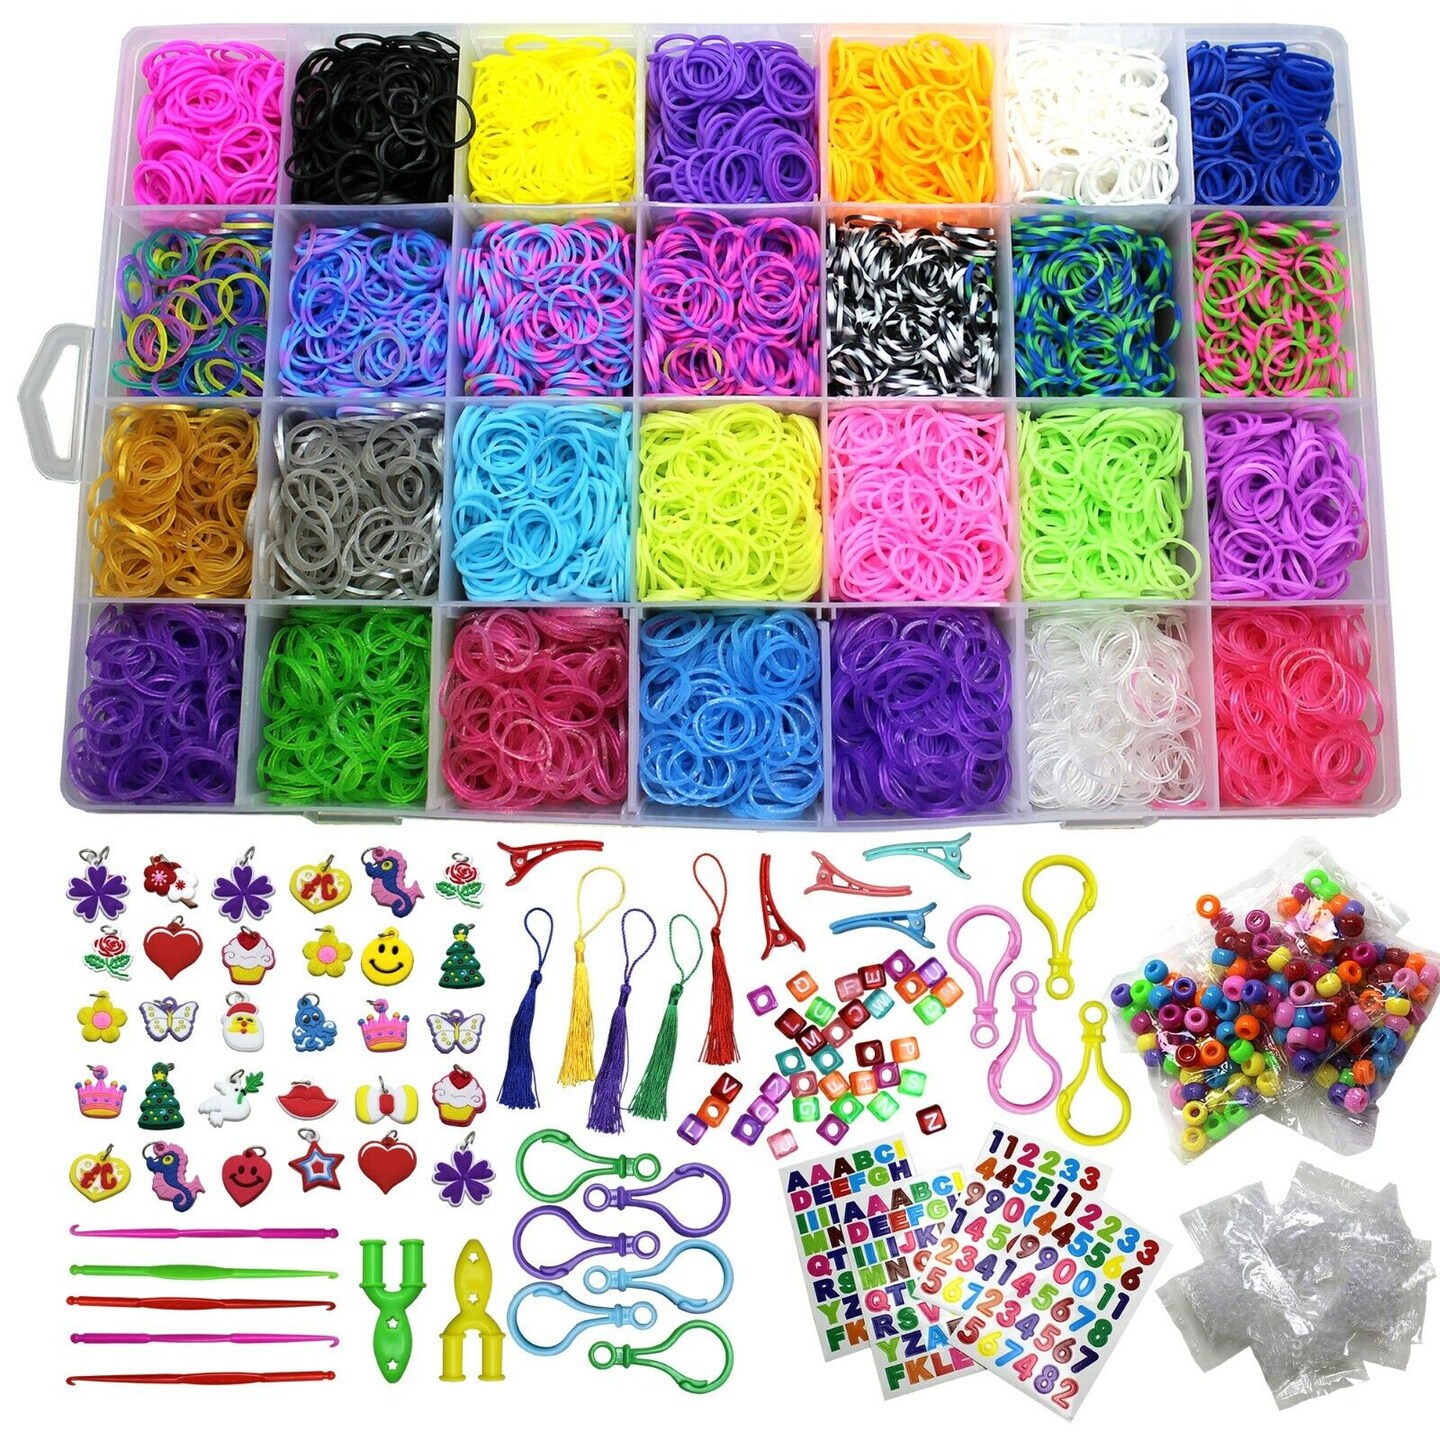 Colorful Rubber Bands Refill Loom Kit Organizer